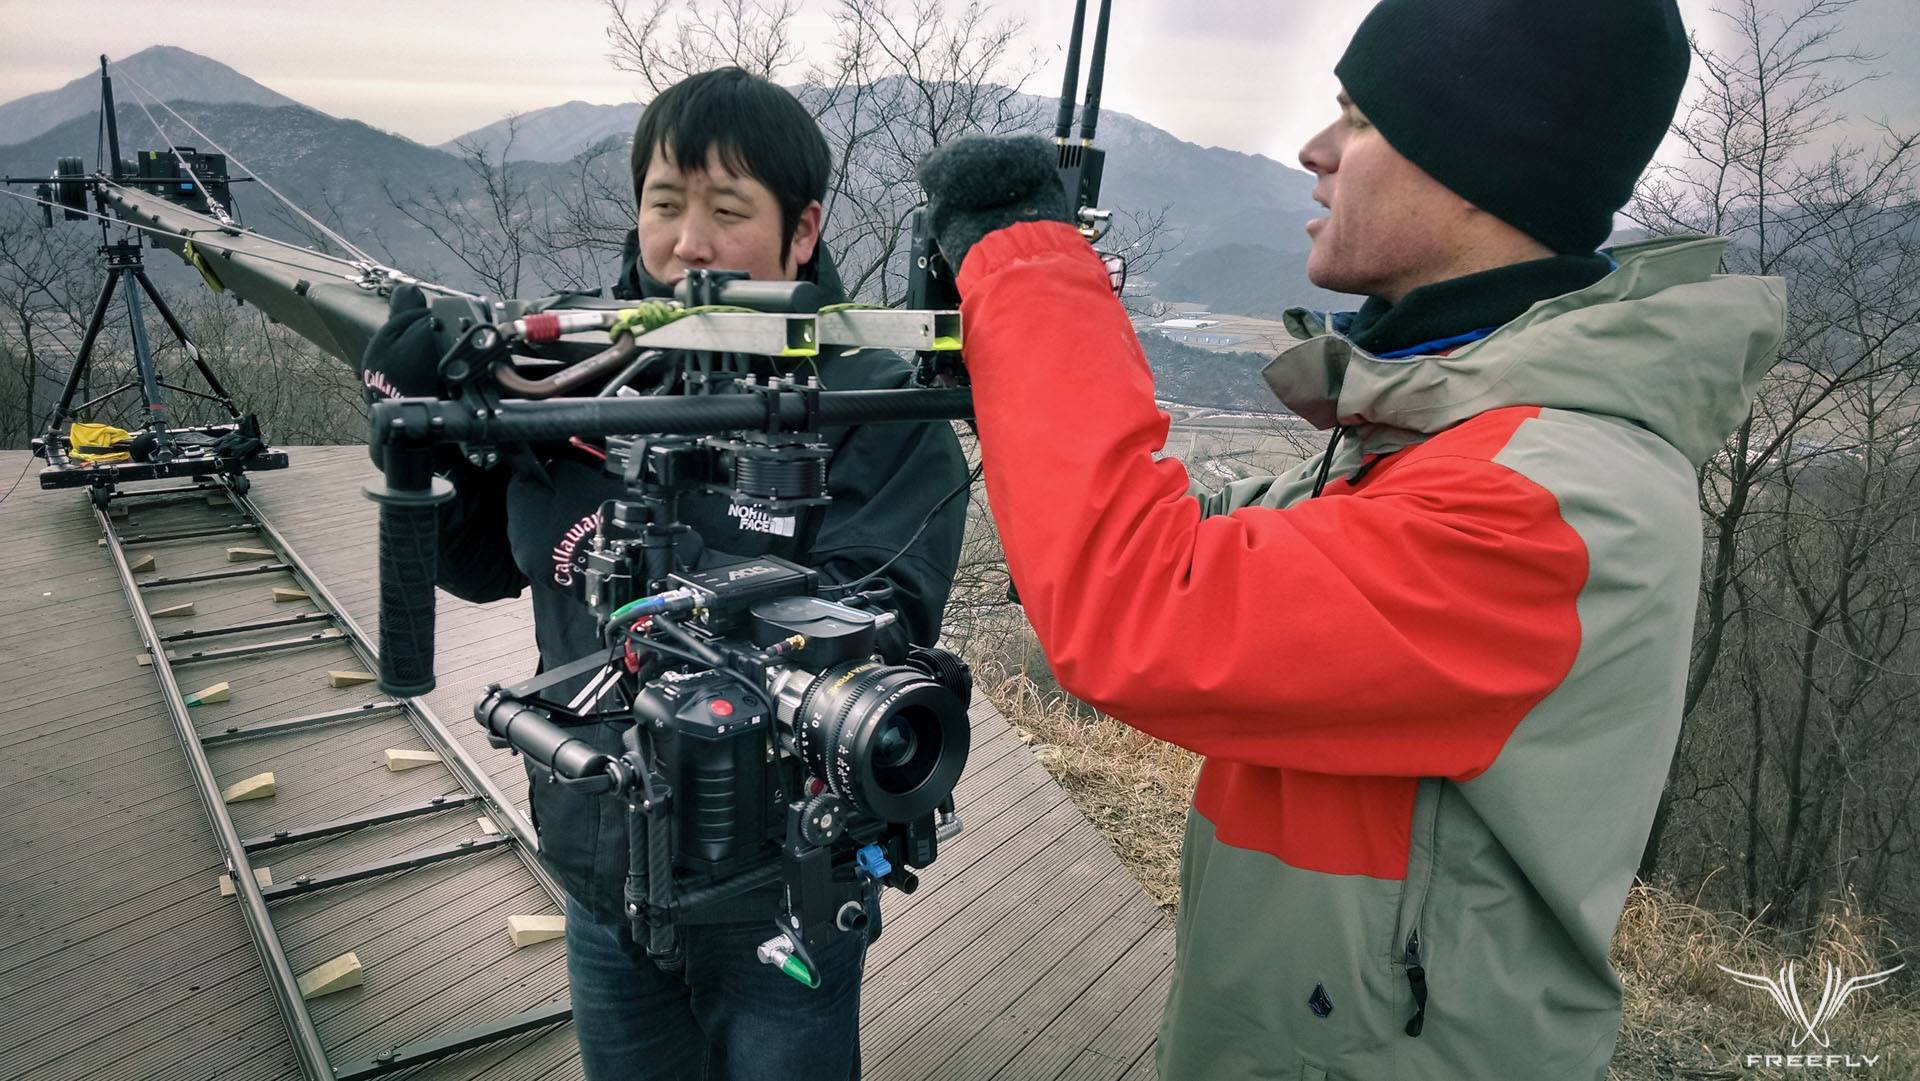 On the border of North and South Korea in the DMZ, prepping a crane to handheld move with the MoVI.